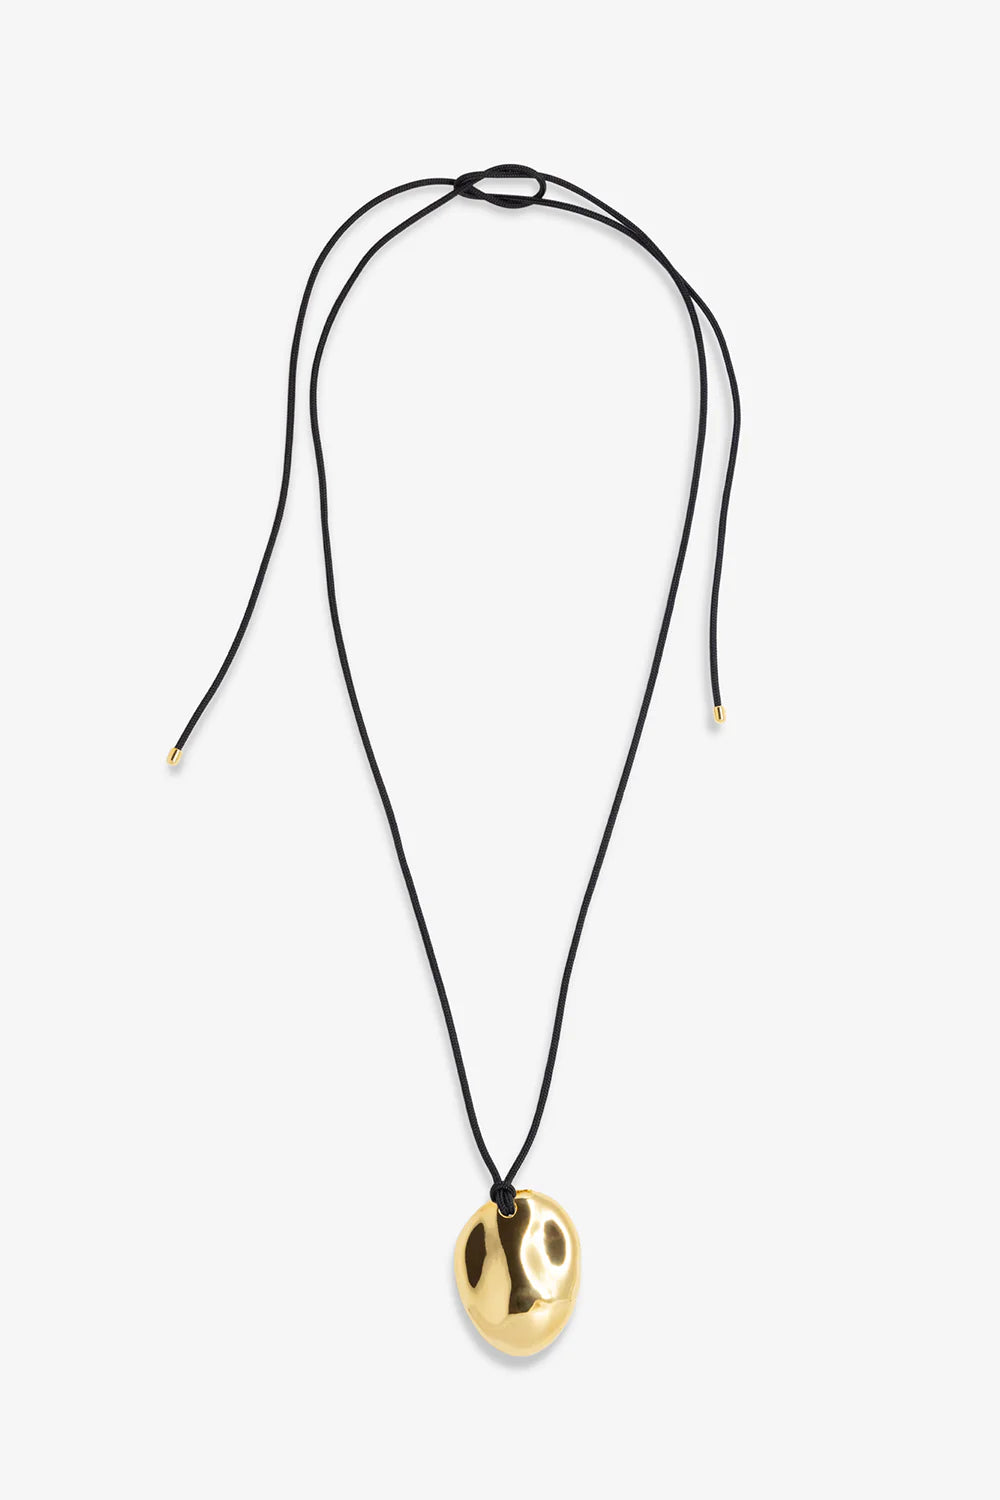 Dylan Dome Necklace Black Cord